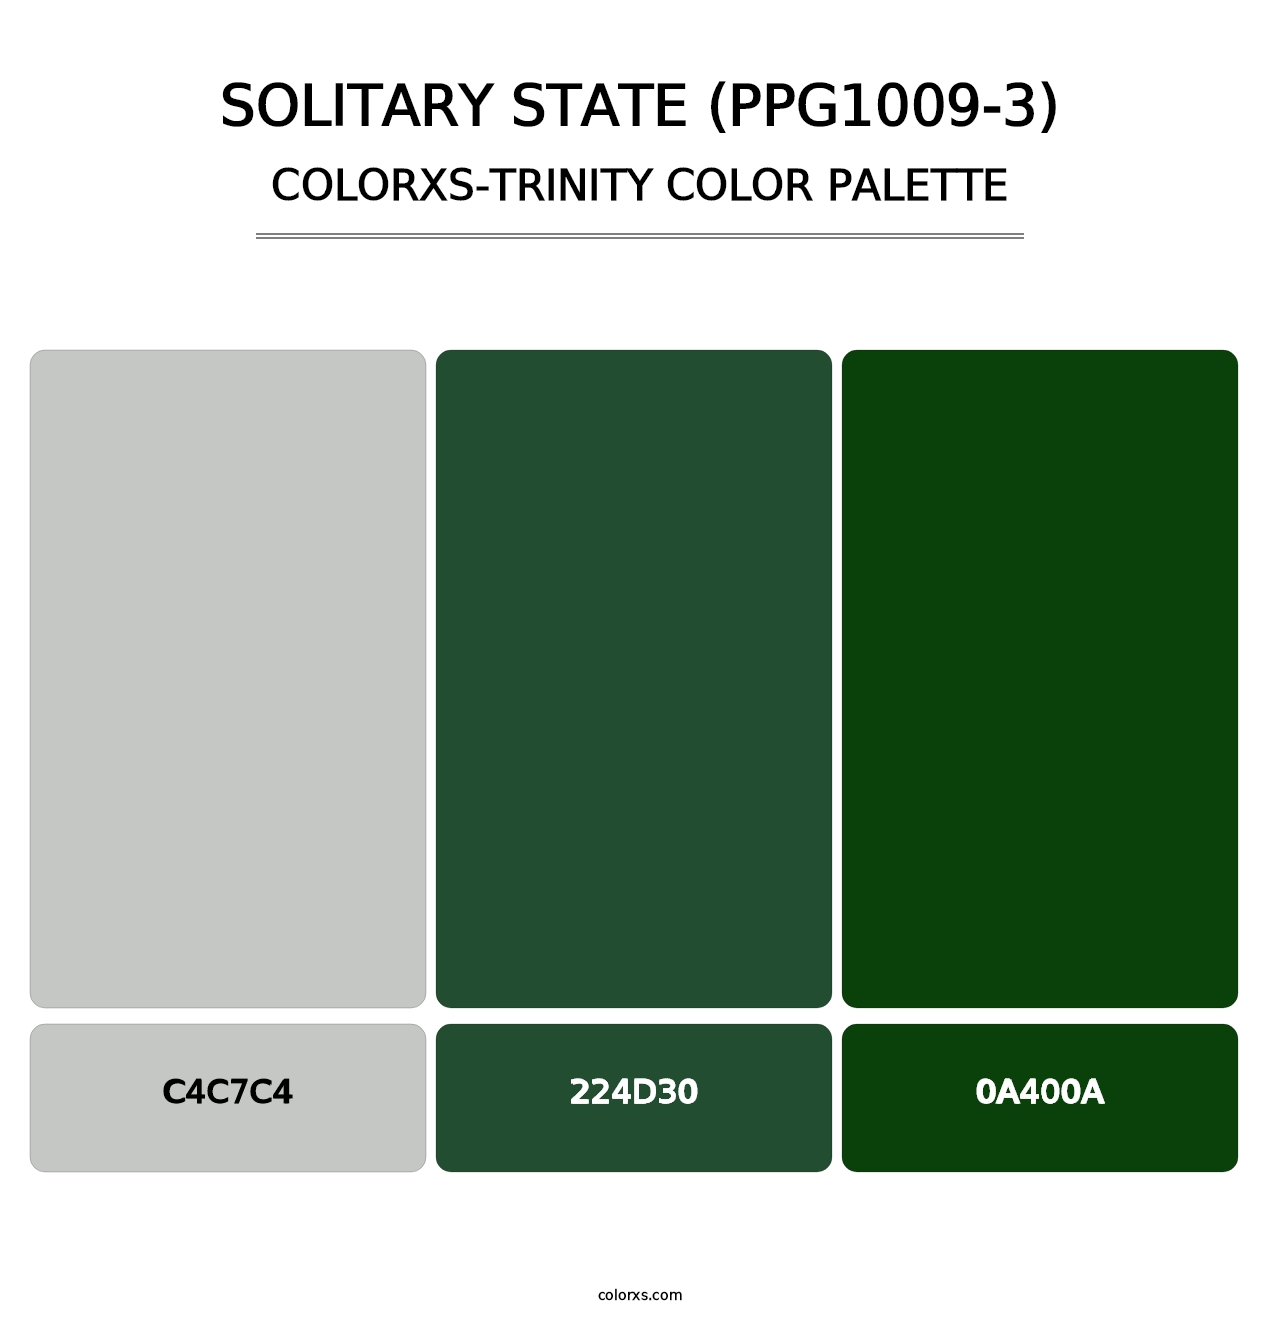 Solitary State (PPG1009-3) - Colorxs Trinity Palette